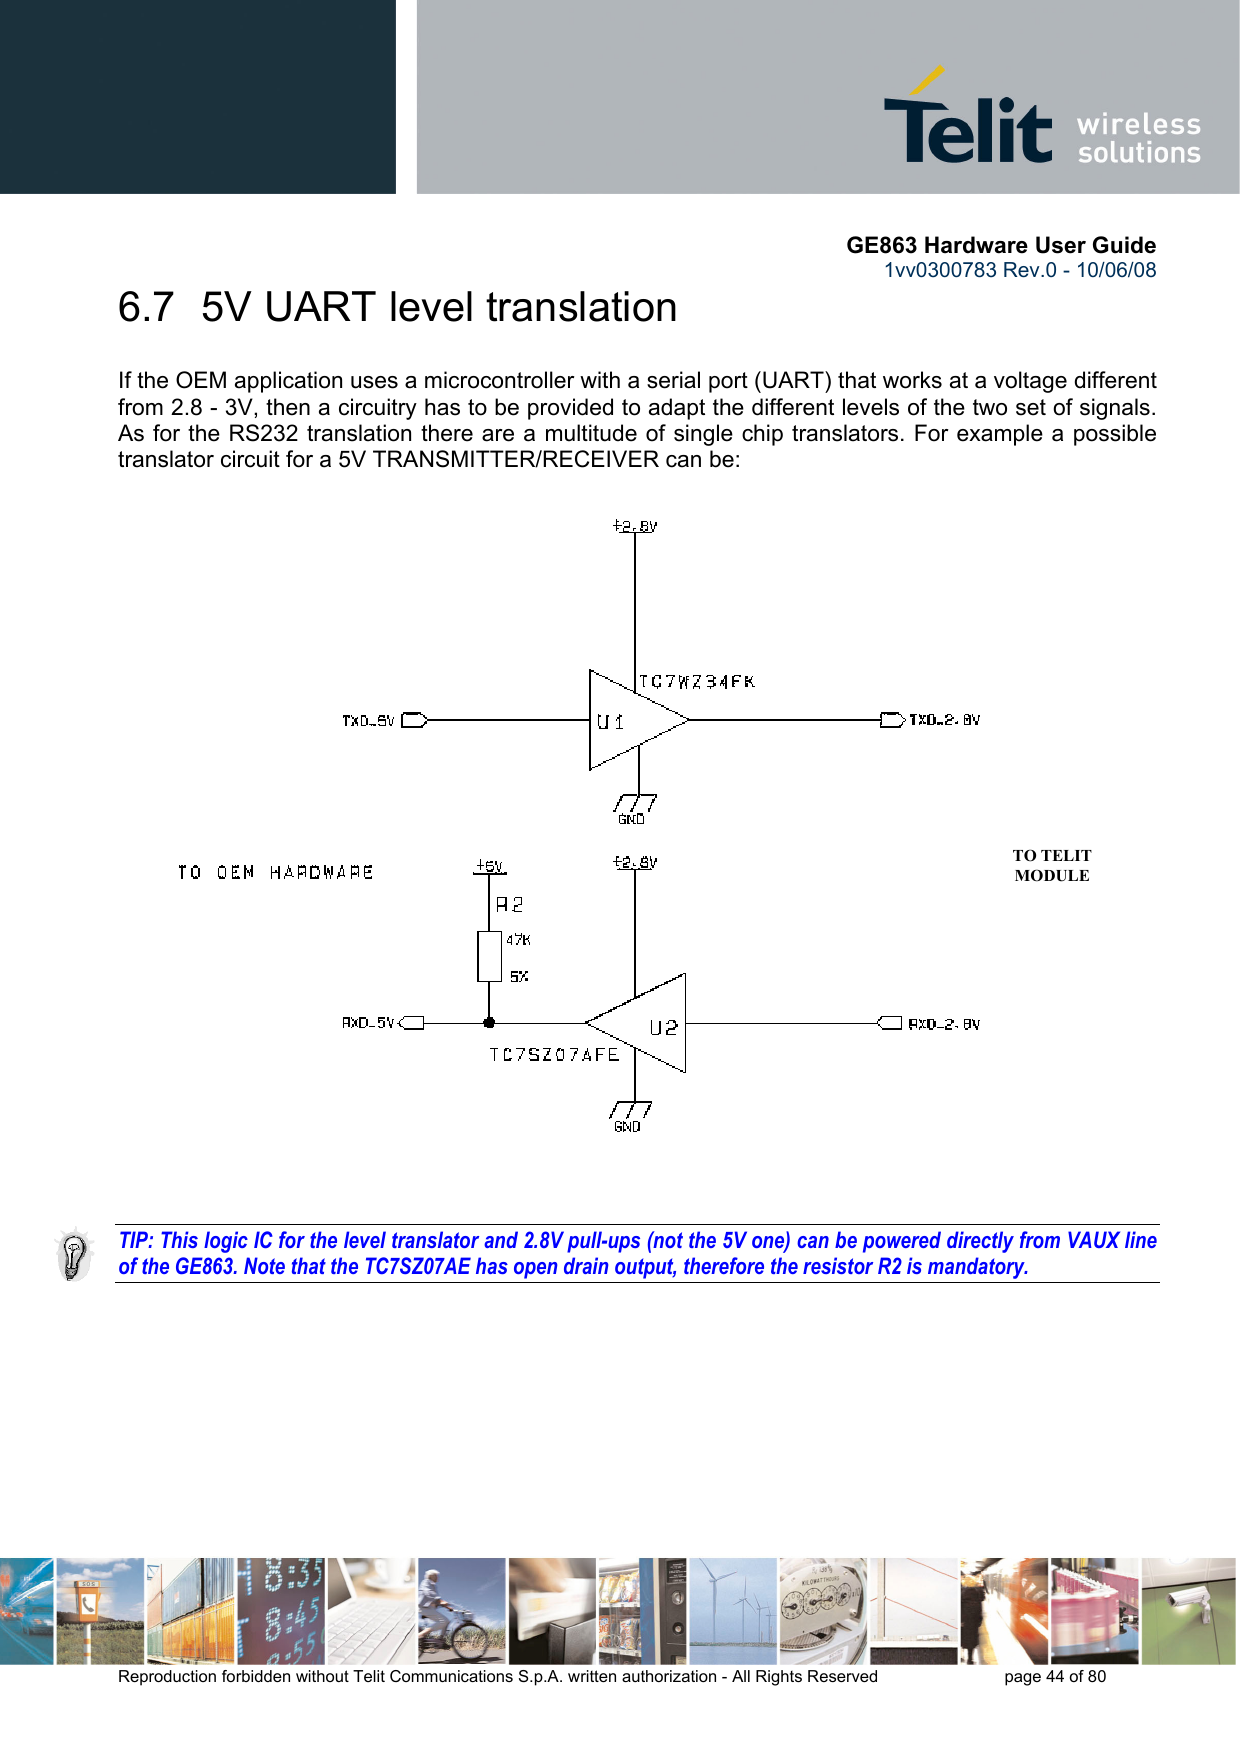       GE863 Hardware User Guide 1vv0300783 Rev.0 - 10/06/08 Reproduction forbidden without Telit Communications S.p.A. written authorization - All Rights Reserved    page 44 of 80  6.7  5V UART level translation If the OEM application uses a microcontroller with a serial port (UART) that works at a voltage different from 2.8 - 3V, then a circuitry has to be provided to adapt the different levels of the two set of signals. As for the RS232 translation there are a multitude of single chip translators. For example a possible translator circuit for a 5V TRANSMITTER/RECEIVER can be:   TO TELIT MODULE     TIP: This logic IC for the level translator and 2.8V pull-ups (not the 5V one) can be powered directly from VAUX line of the GE863. Note that the TC7SZ07AE has open drain output, therefore the resistor R2 is mandatory. 